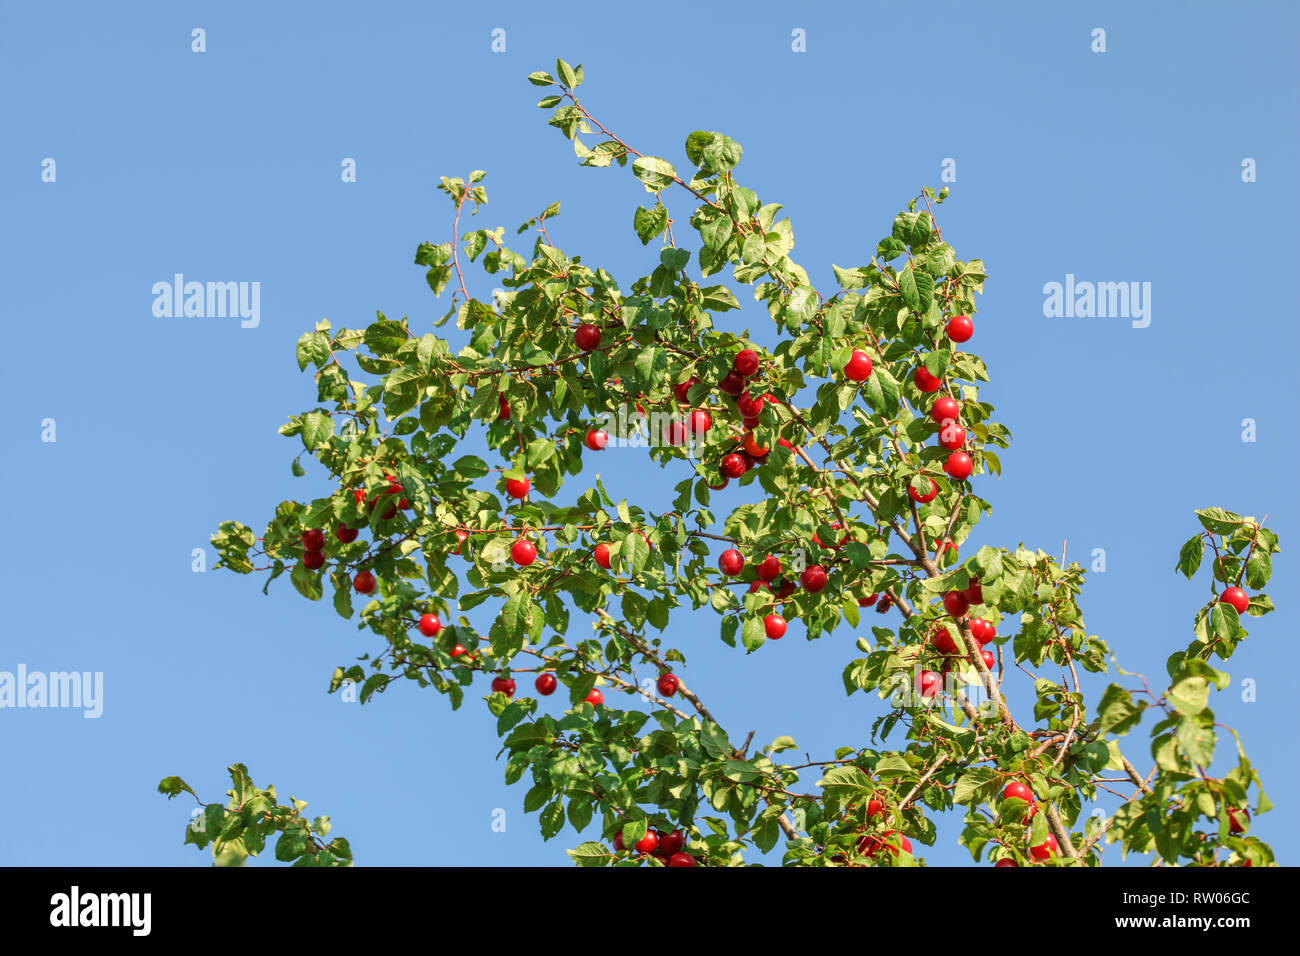 Tree branch with red Mirabelle Plum / Prune (Prunus domestica subsp. syriaca) fruits with blue sky in background. Stock Photo